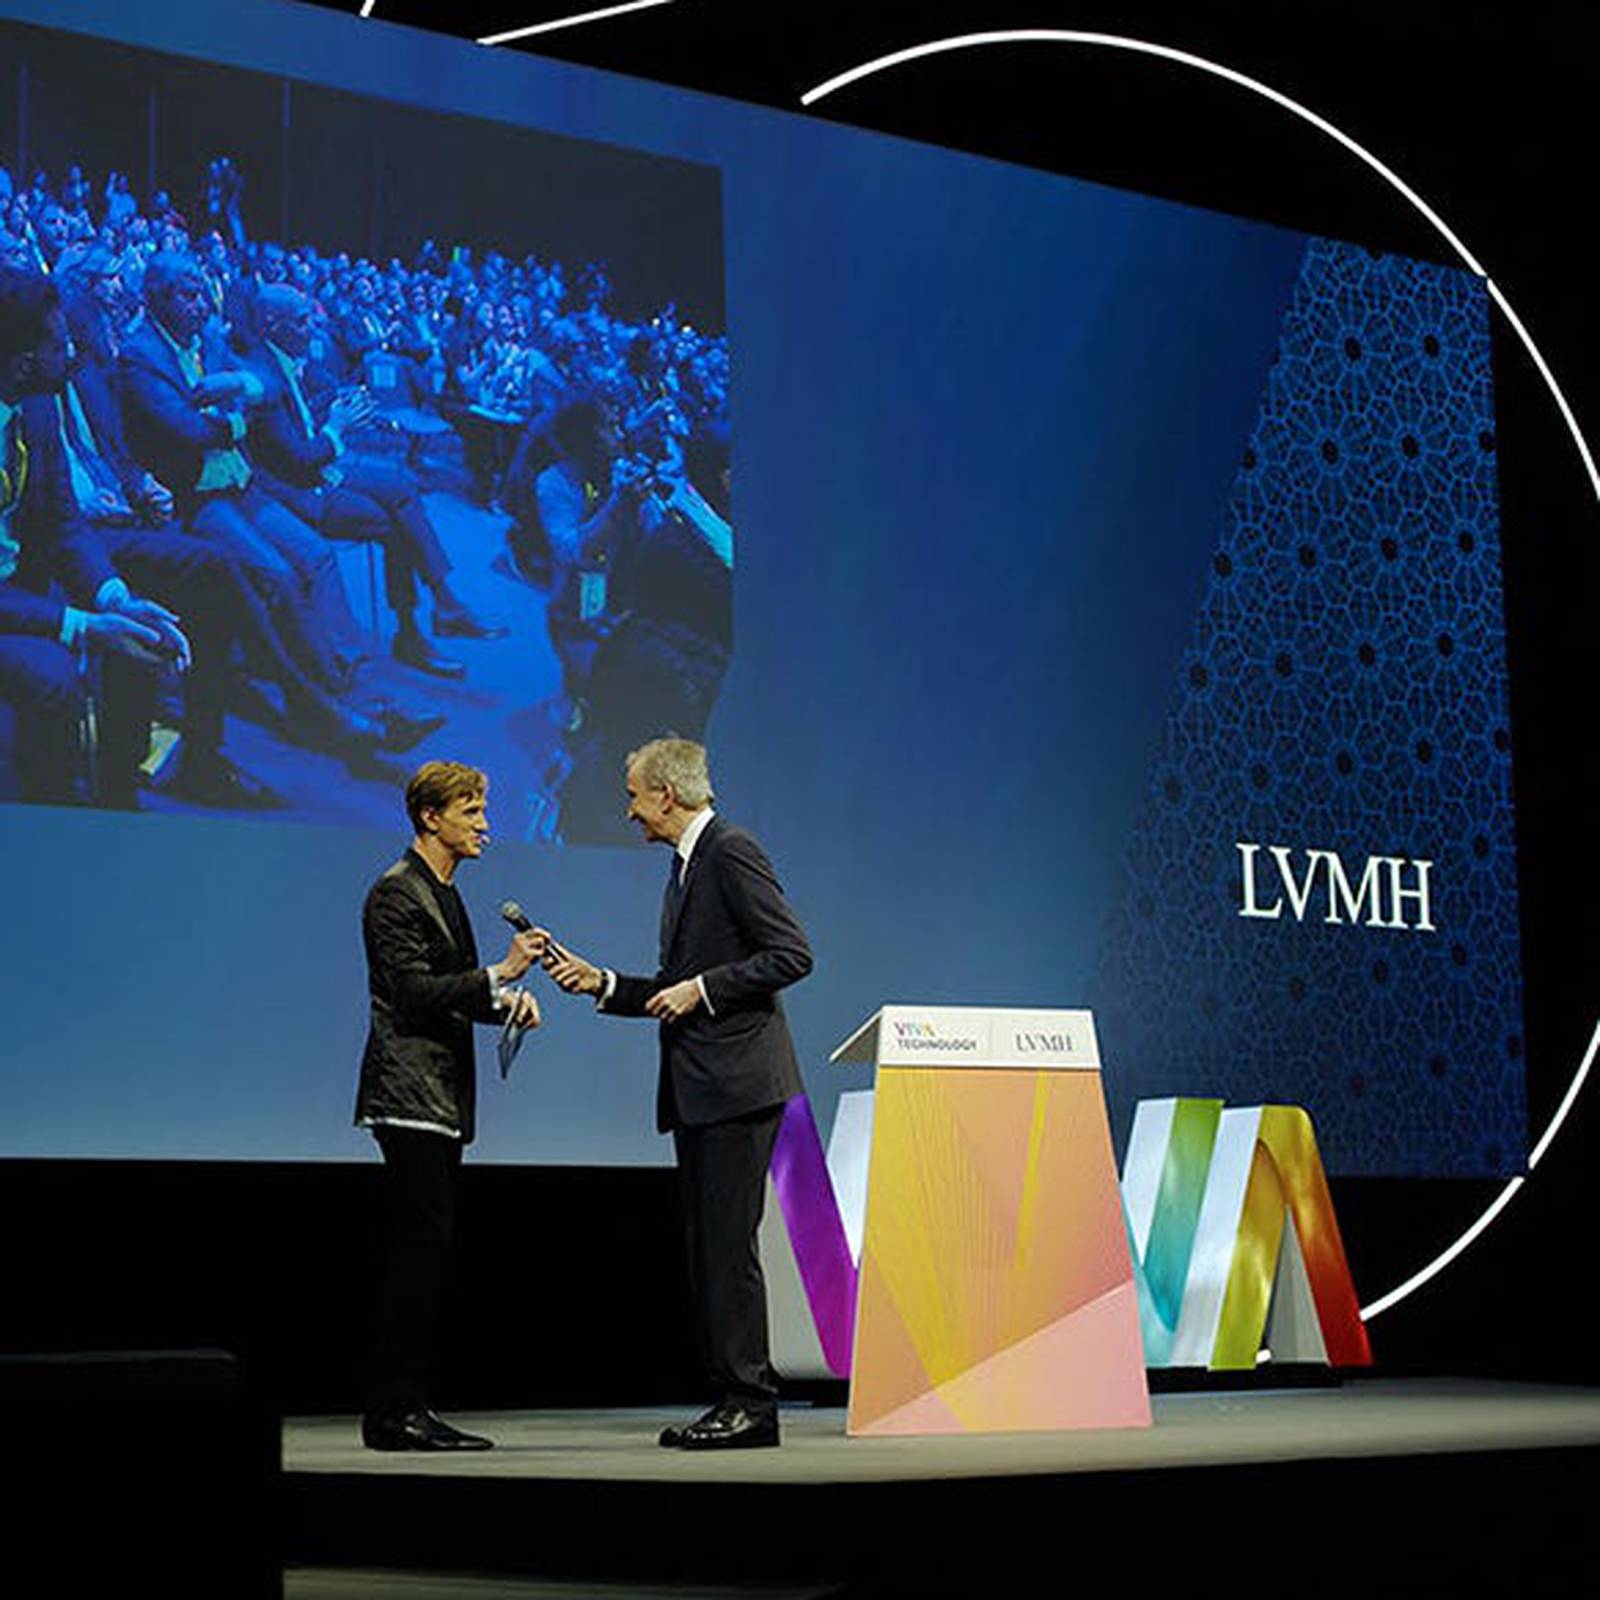 LVMH 2019 Release of Its Annual Report Showcasing 2019 